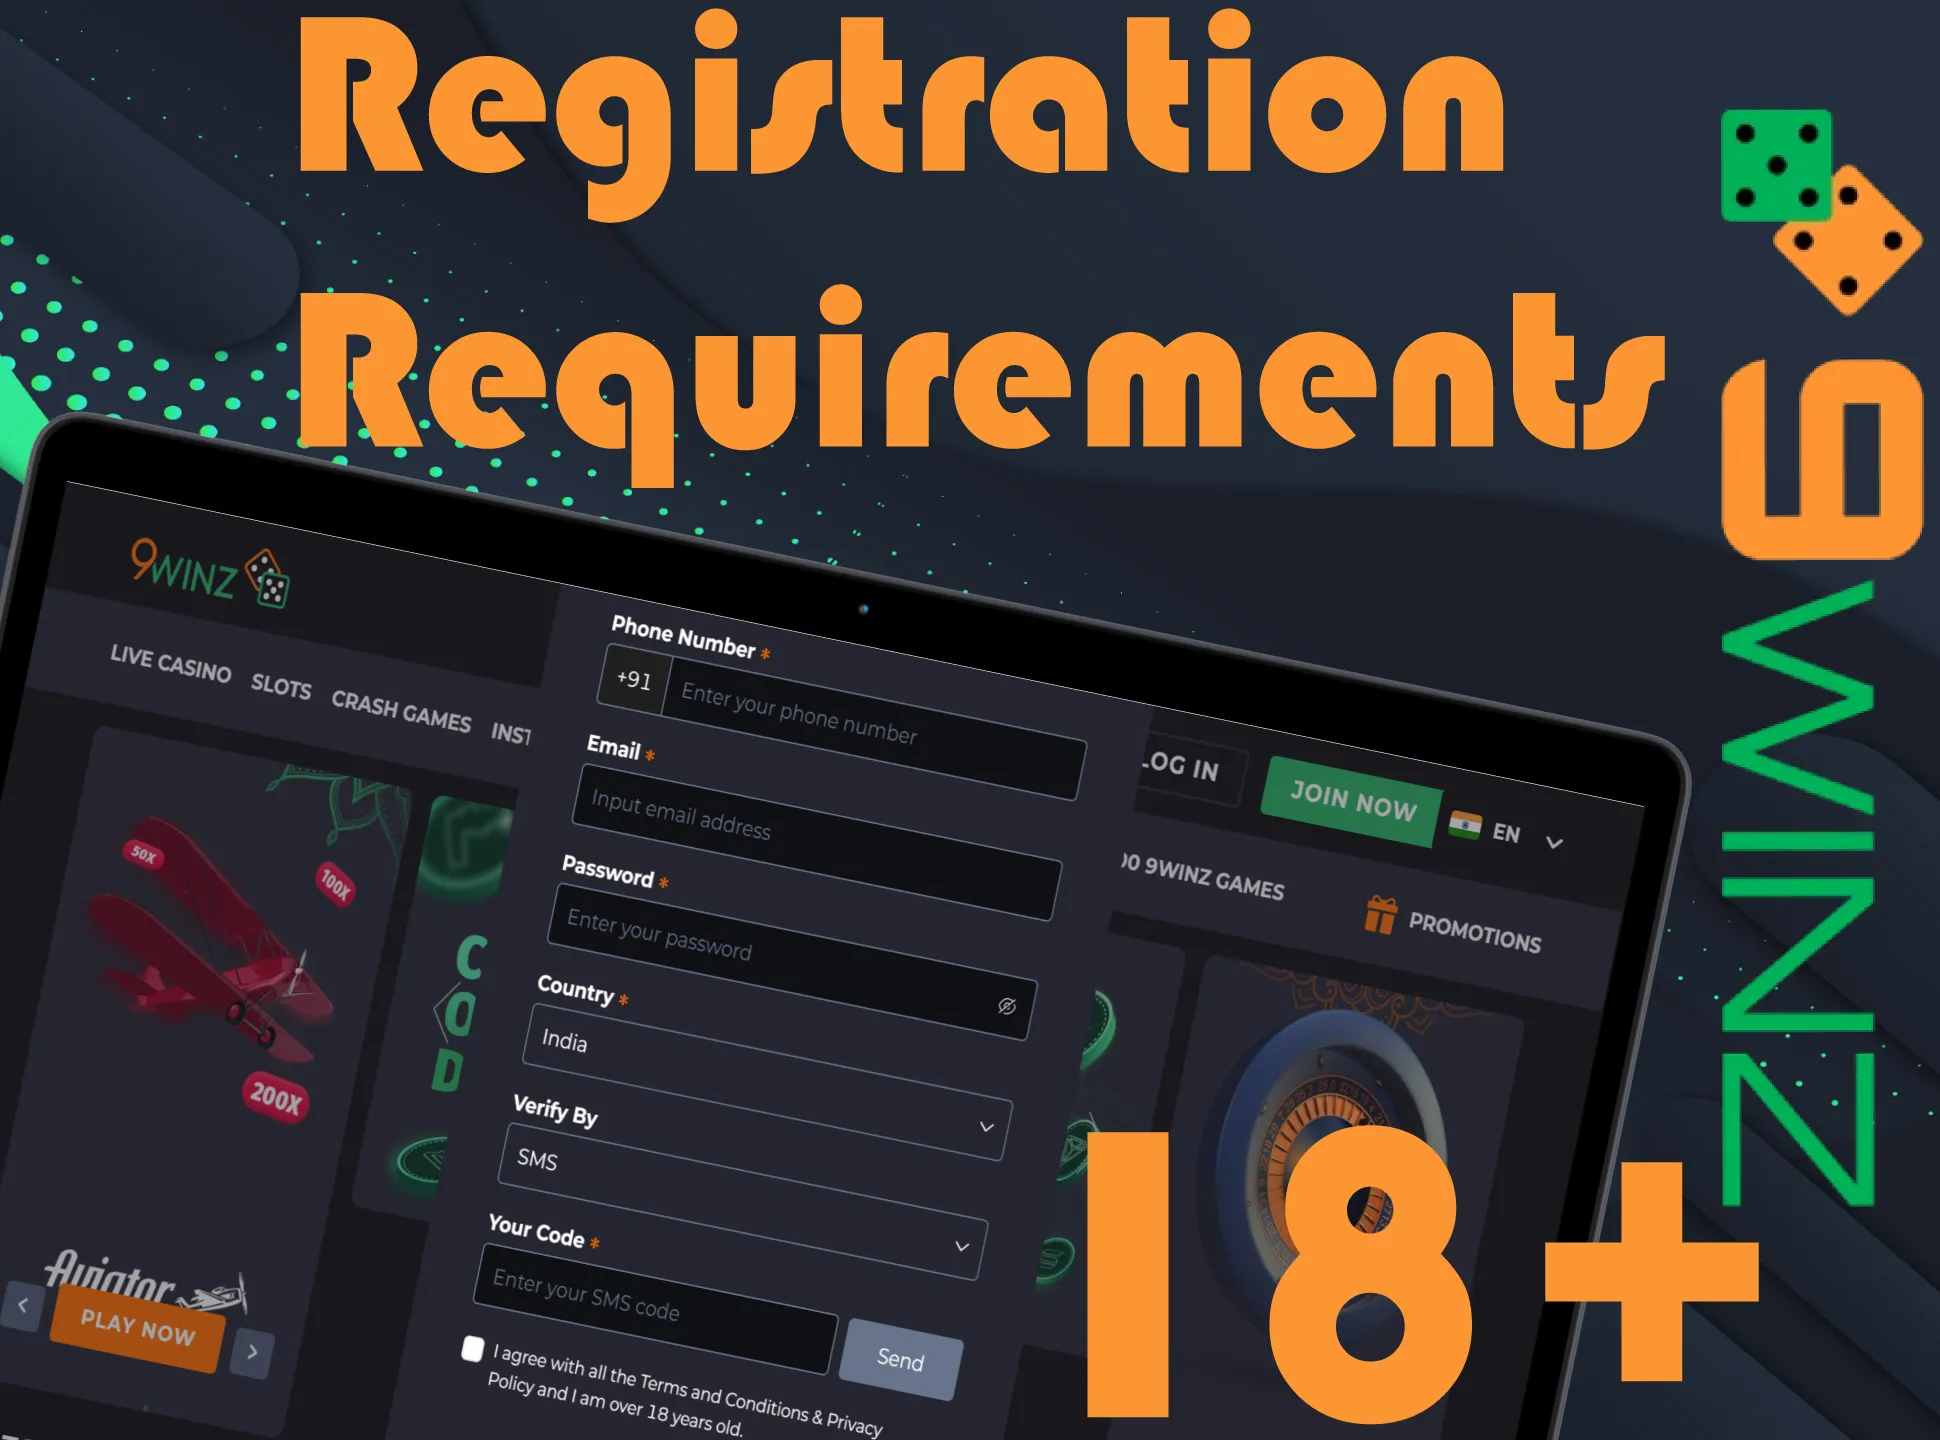 Follow 9winz registration requirements while making new account.